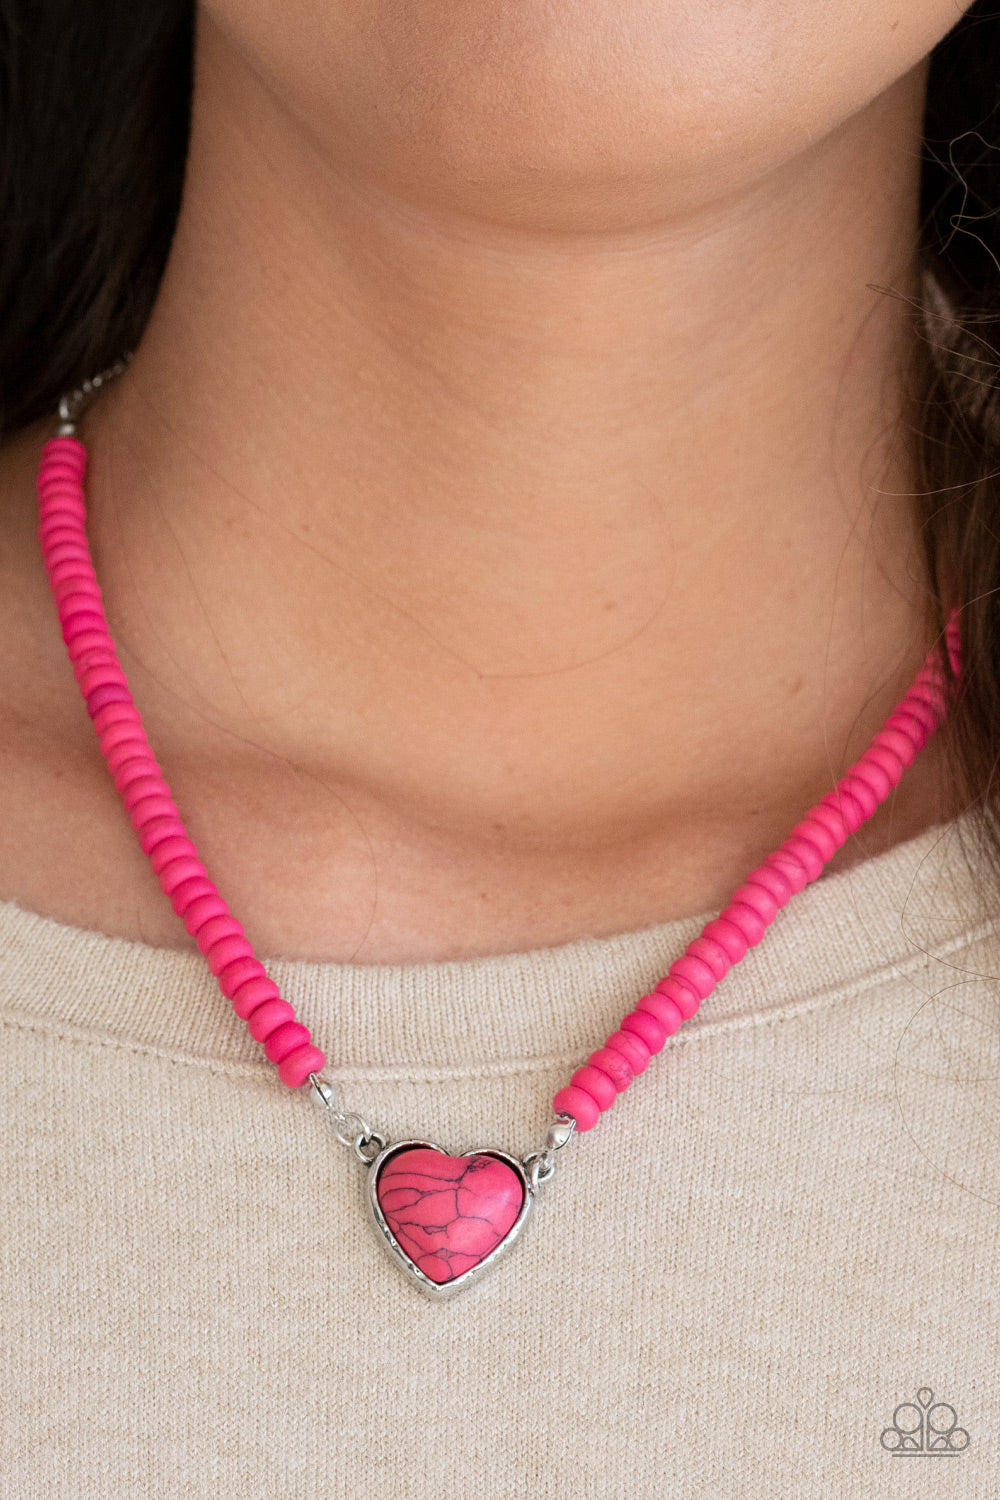 Paparazzi Country Sweetheart - Pink Necklace $5 jewelry. #P2SE-PKXX-205YT Get Free Shipping!